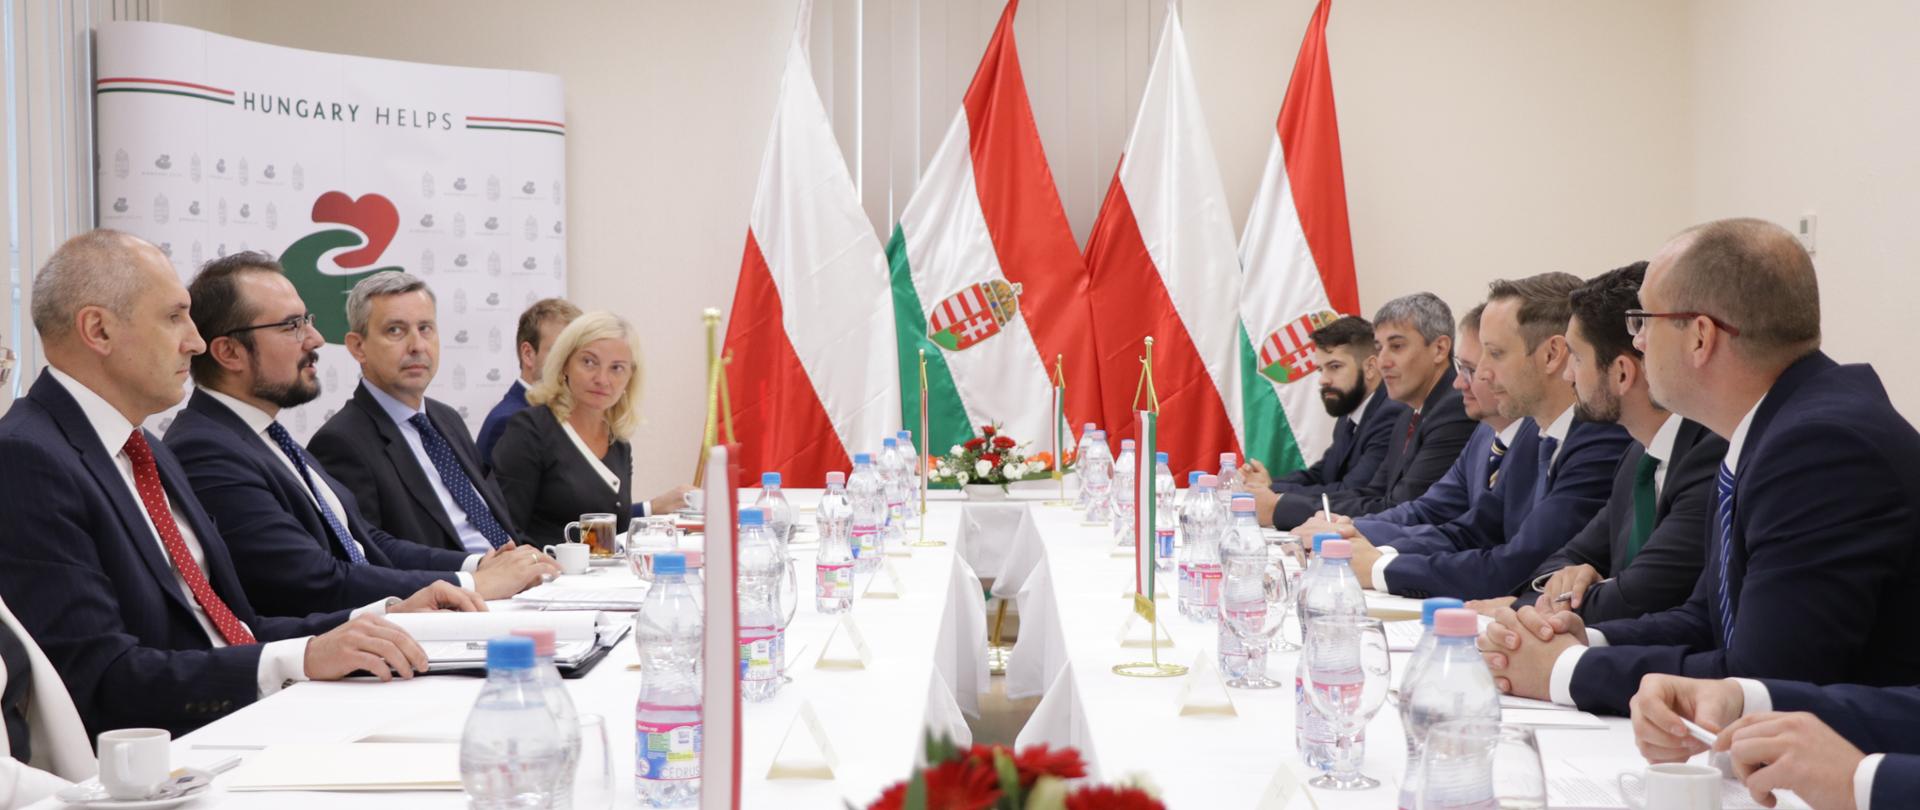 Poland and Hungary to help religious persecution victims together